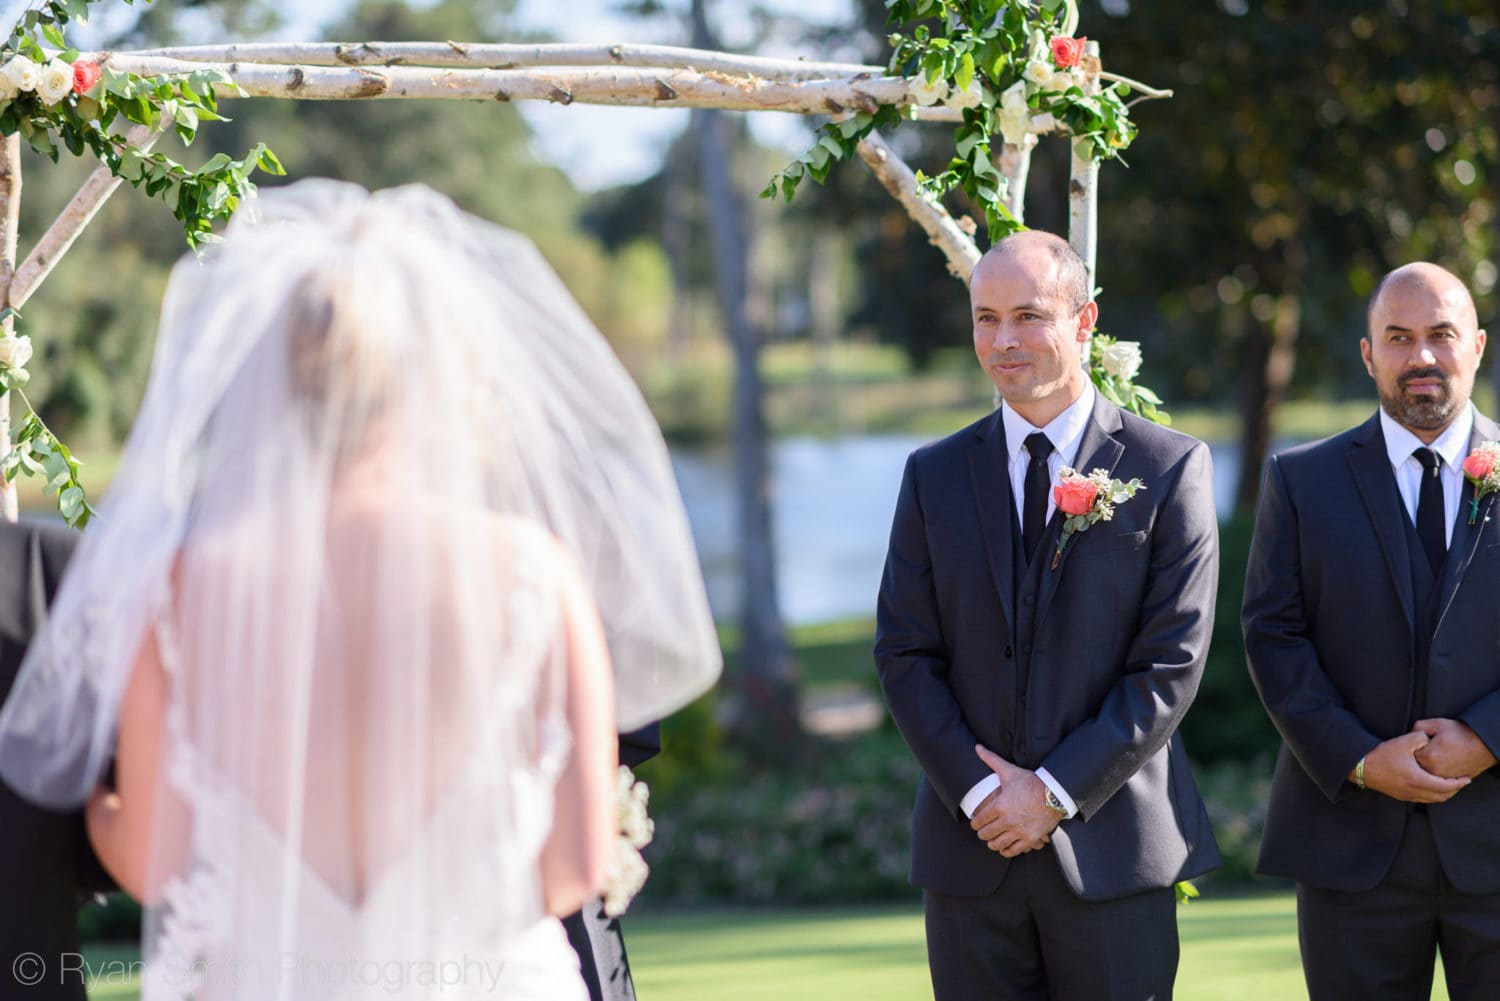 Groom's first look at bride during the ceremony - Pawleys Plantation